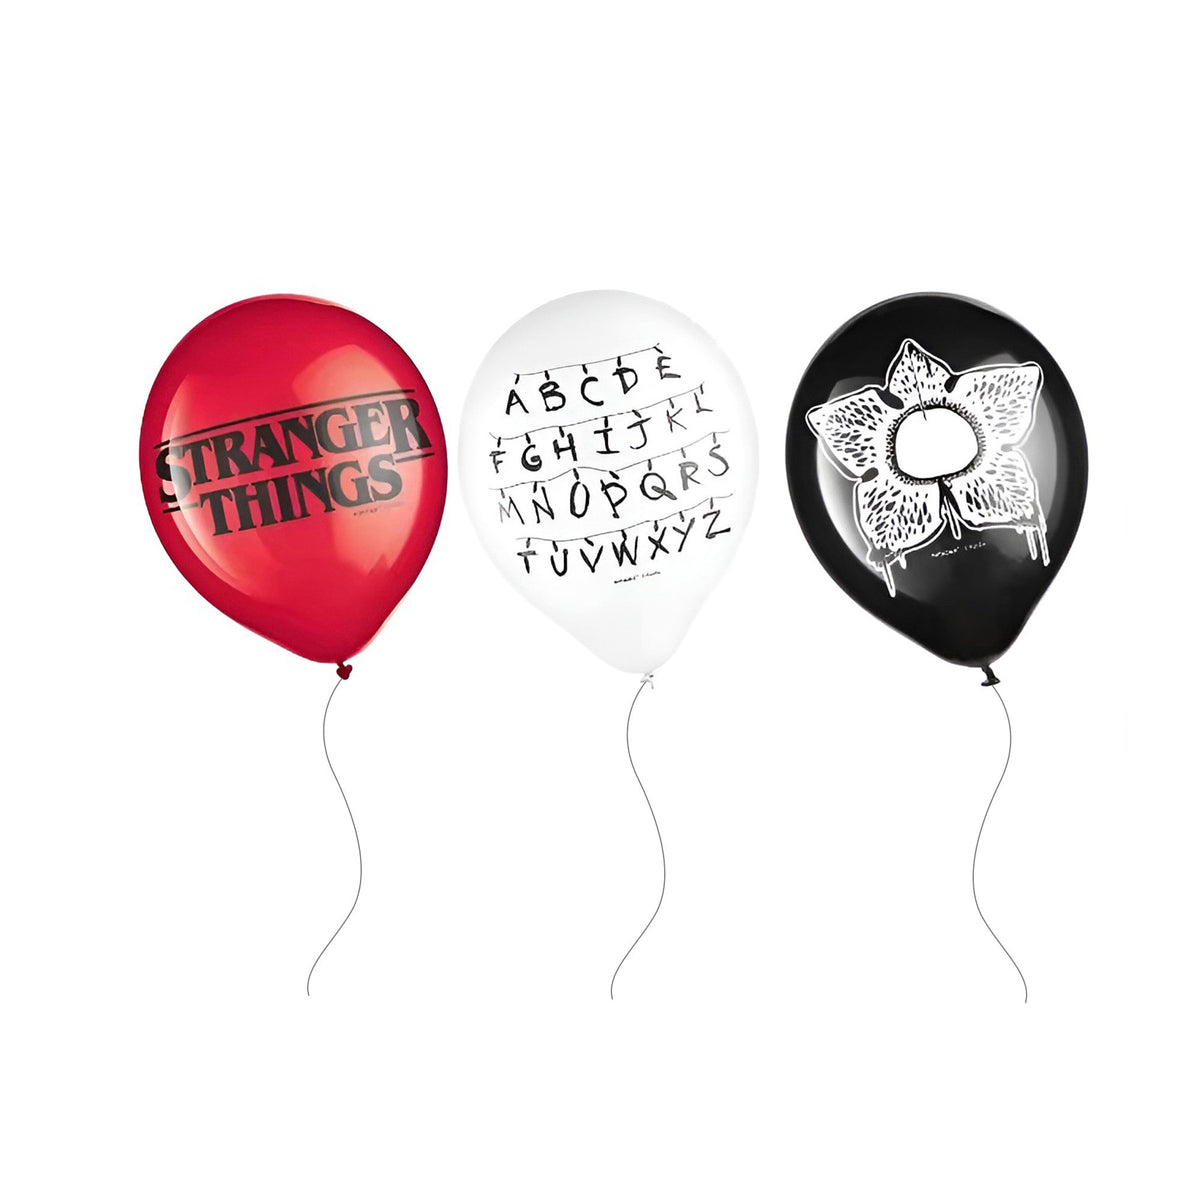 Shaoxing Keqiao Chengyou Textile Co.,Ltd Halloween Stranger Things Printed Latex Balloons, Red, Black and White, 12 inches, 12 Count 810077657911